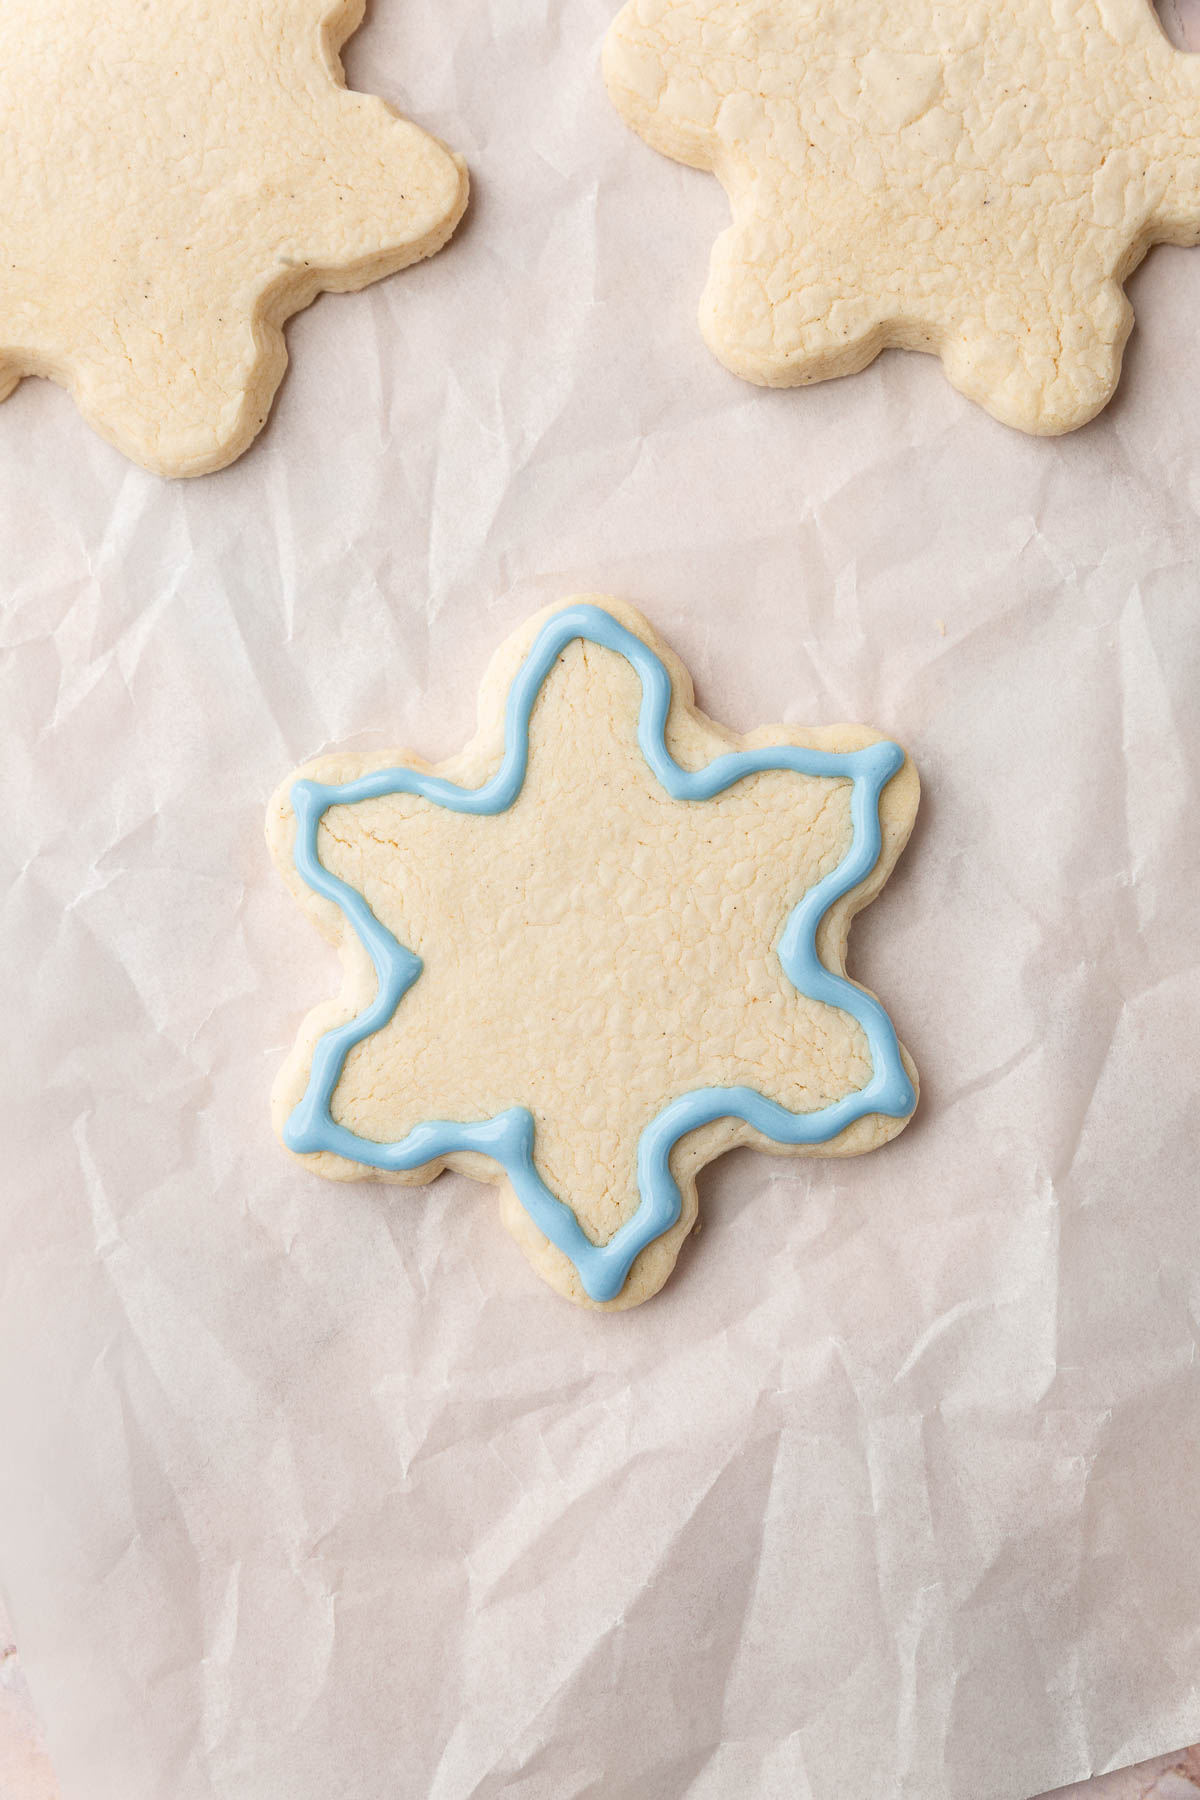 Three gluten-free snowflake cookies on a piece of parchment paper with one outlined with blue royal icing.